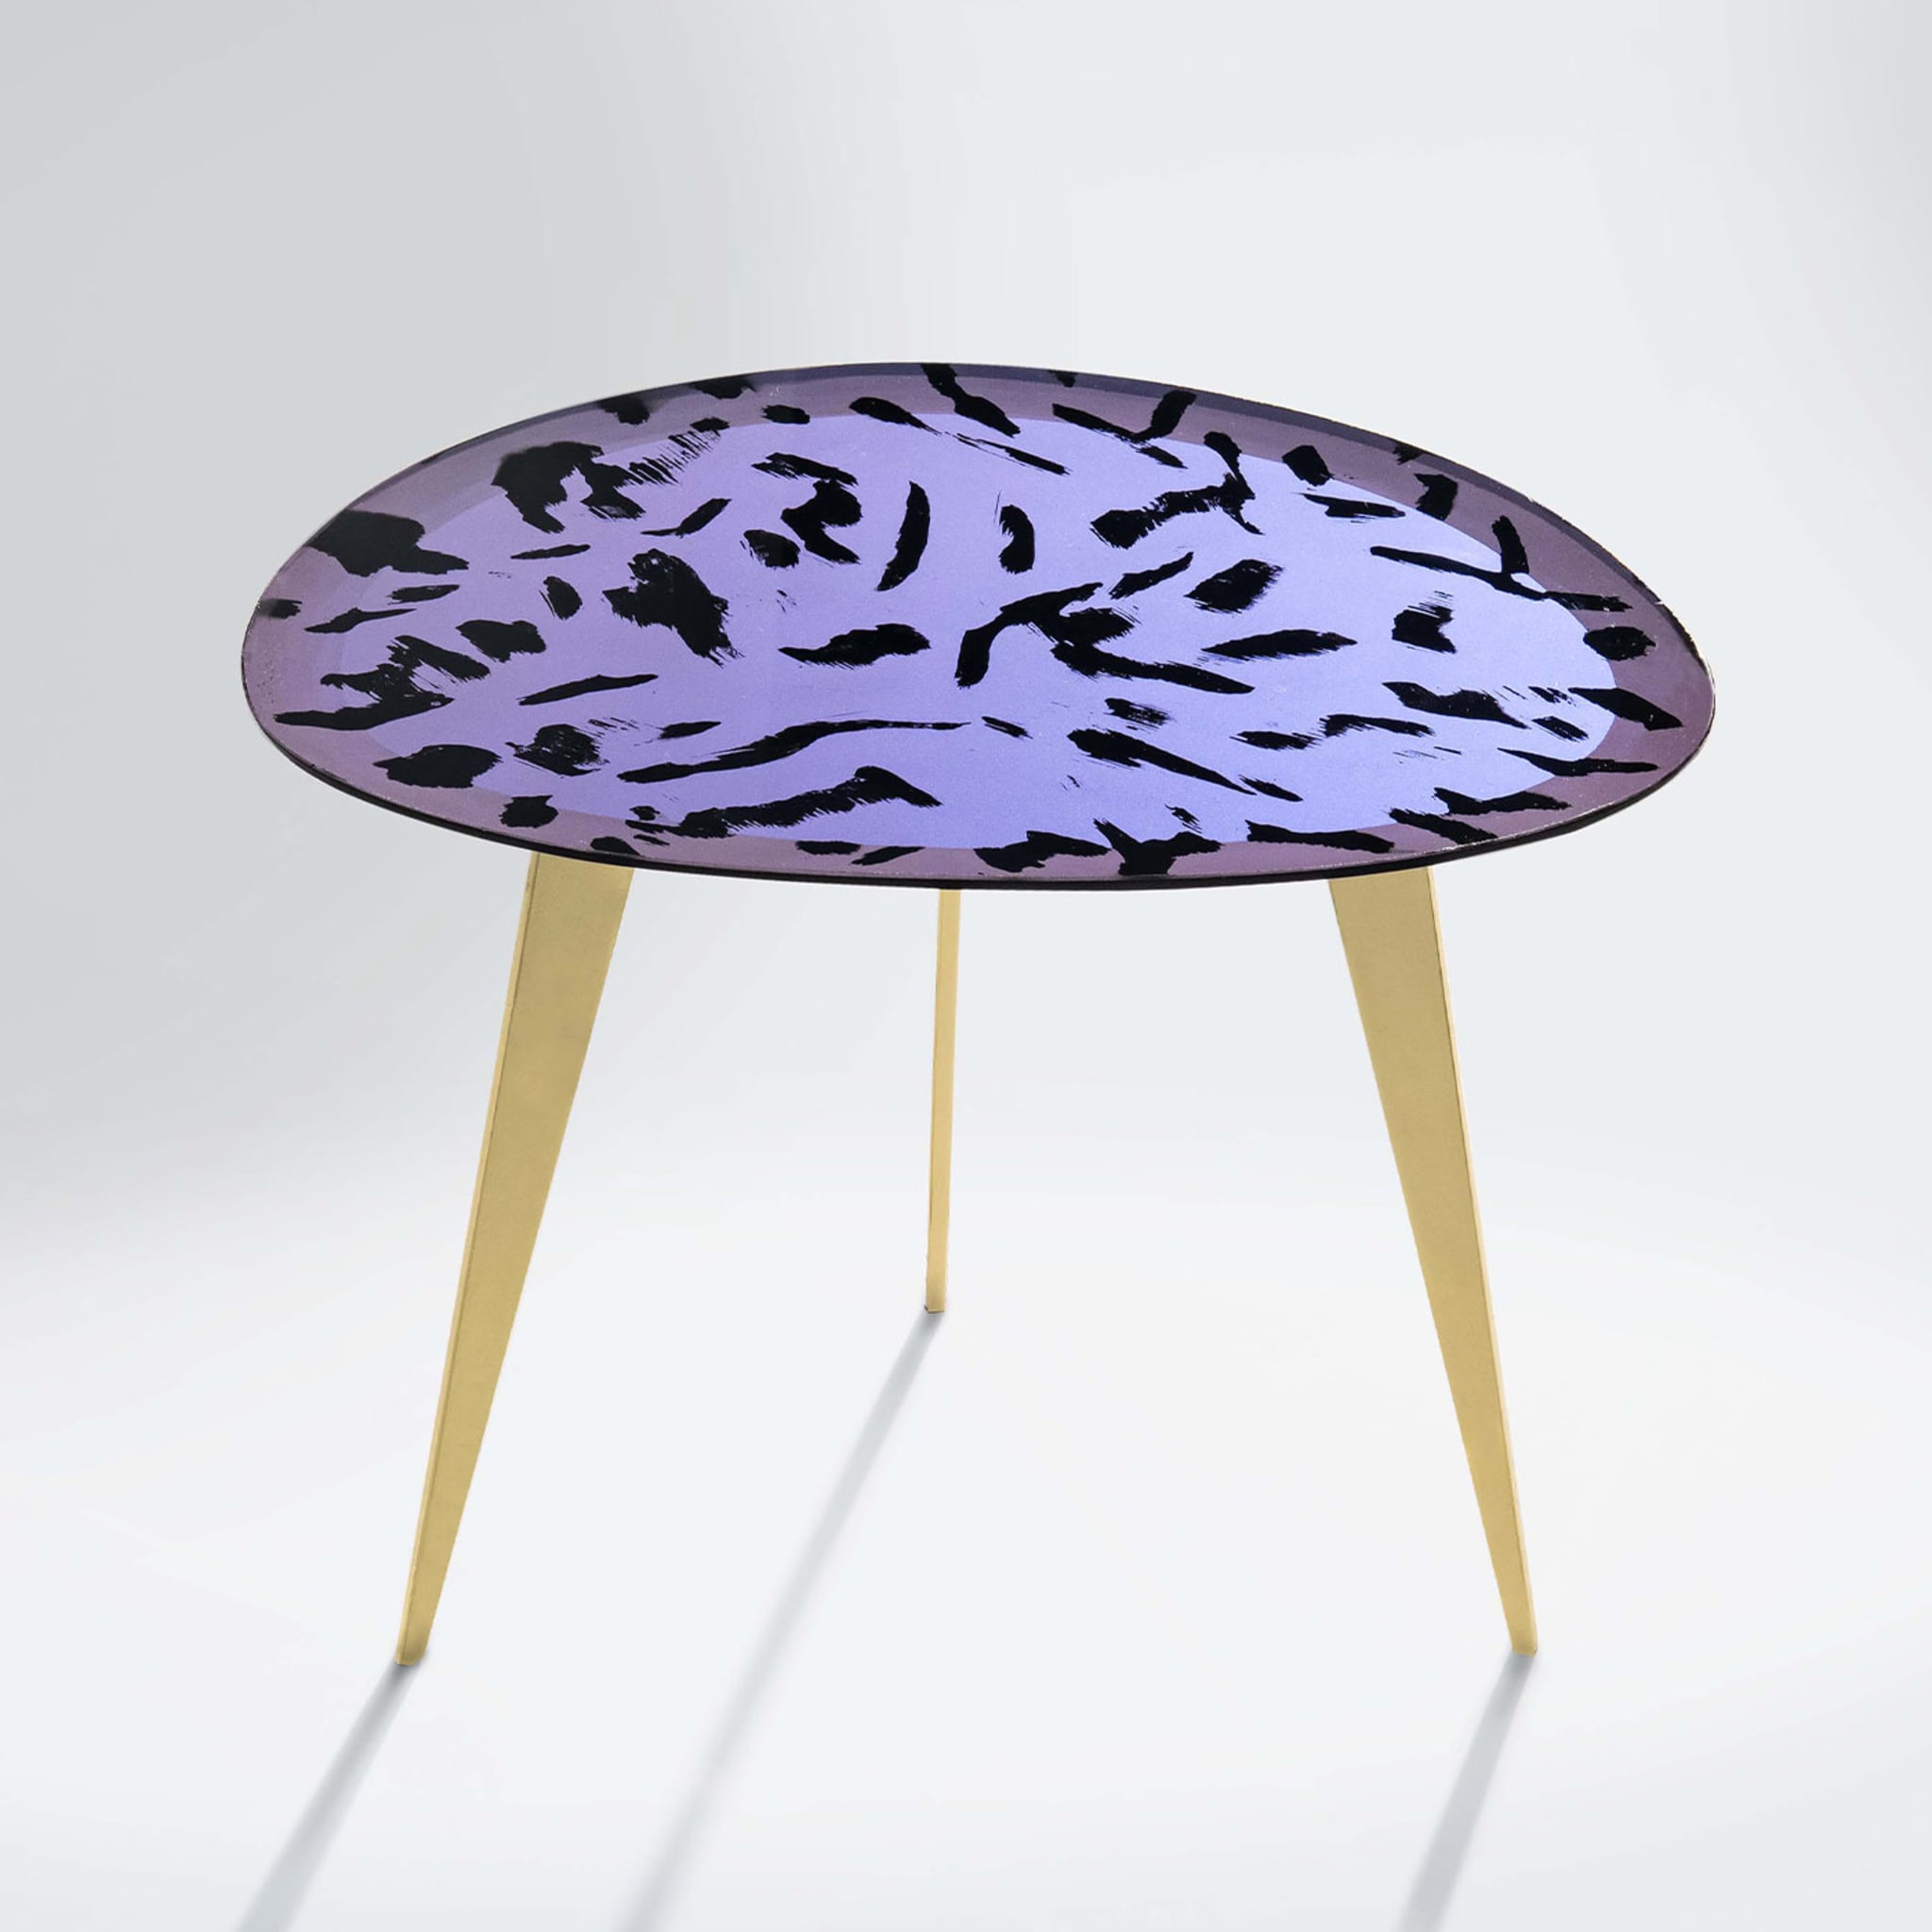 Puá Iridescent Pink Coffee Table - Alternative view 4